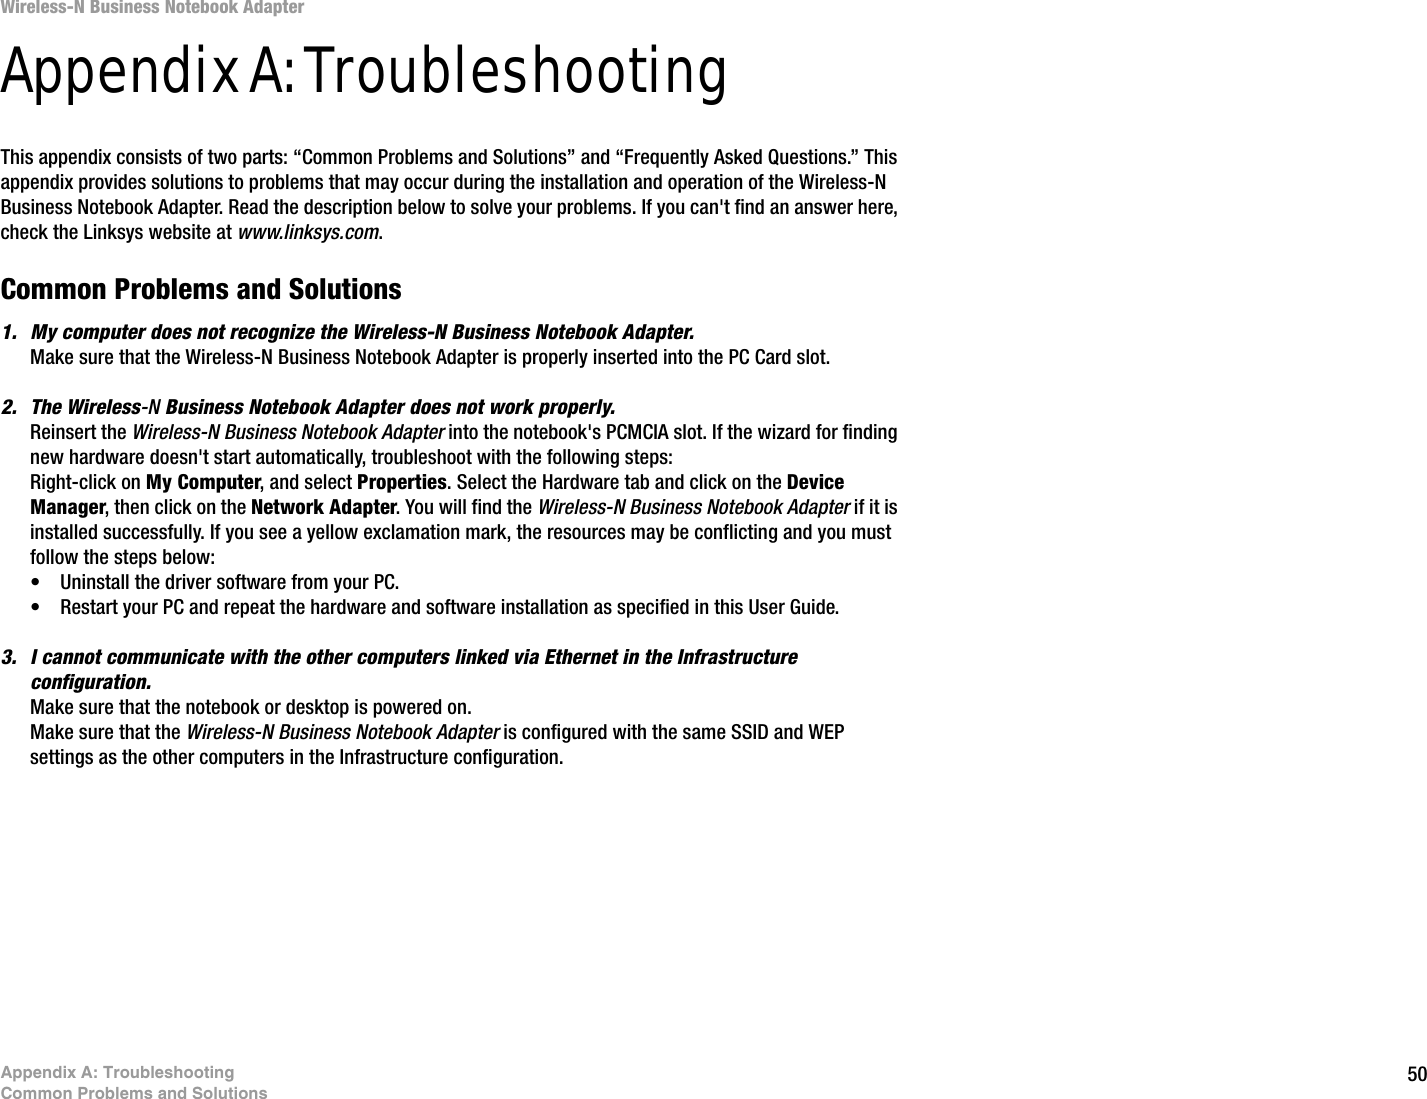 50Appendix A: TroubleshootingCommon Problems and SolutionsWireless-N Business Notebook Adapter Appendix A: TroubleshootingThis appendix consists of two parts: “Common Problems and Solutions” and “Frequently Asked Questions.” This appendix provides solutions to problems that may occur during the installation and operation of the Wireless-N Business Notebook Adapter. Read the description below to solve your problems. If you can&apos;t find an answer here, check the Linksys website at www.linksys.com.Common Problems and Solutions1. My computer does not recognize the Wireless-N Business Notebook Adapter.Make sure that the Wireless-N Business Notebook Adapter is properly inserted into the PC Card slot.2. The Wireless-N Business Notebook Adapter does not work properly.Reinsert the Wireless-N Business Notebook Adapter into the notebook&apos;s PCMCIA slot. If the wizard for finding new hardware doesn&apos;t start automatically, troubleshoot with the following steps:Right-click on My Computer, and select Properties. Select the Hardware tab and click on the Device Manager, then click on the Network Adapter. You will find the Wireless-N Business Notebook Adapter if it is installed successfully. If you see a yellow exclamation mark, the resources may be conflicting and you must follow the steps below:• Uninstall the driver software from your PC.• Restart your PC and repeat the hardware and software installation as specified in this User Guide.3. I cannot communicate with the other computers linked via Ethernet in the Infrastructure configuration.Make sure that the notebook or desktop is powered on.Make sure that the Wireless-N Business Notebook Adapter is configured with the same SSID and WEP settings as the other computers in the Infrastructure configuration. 